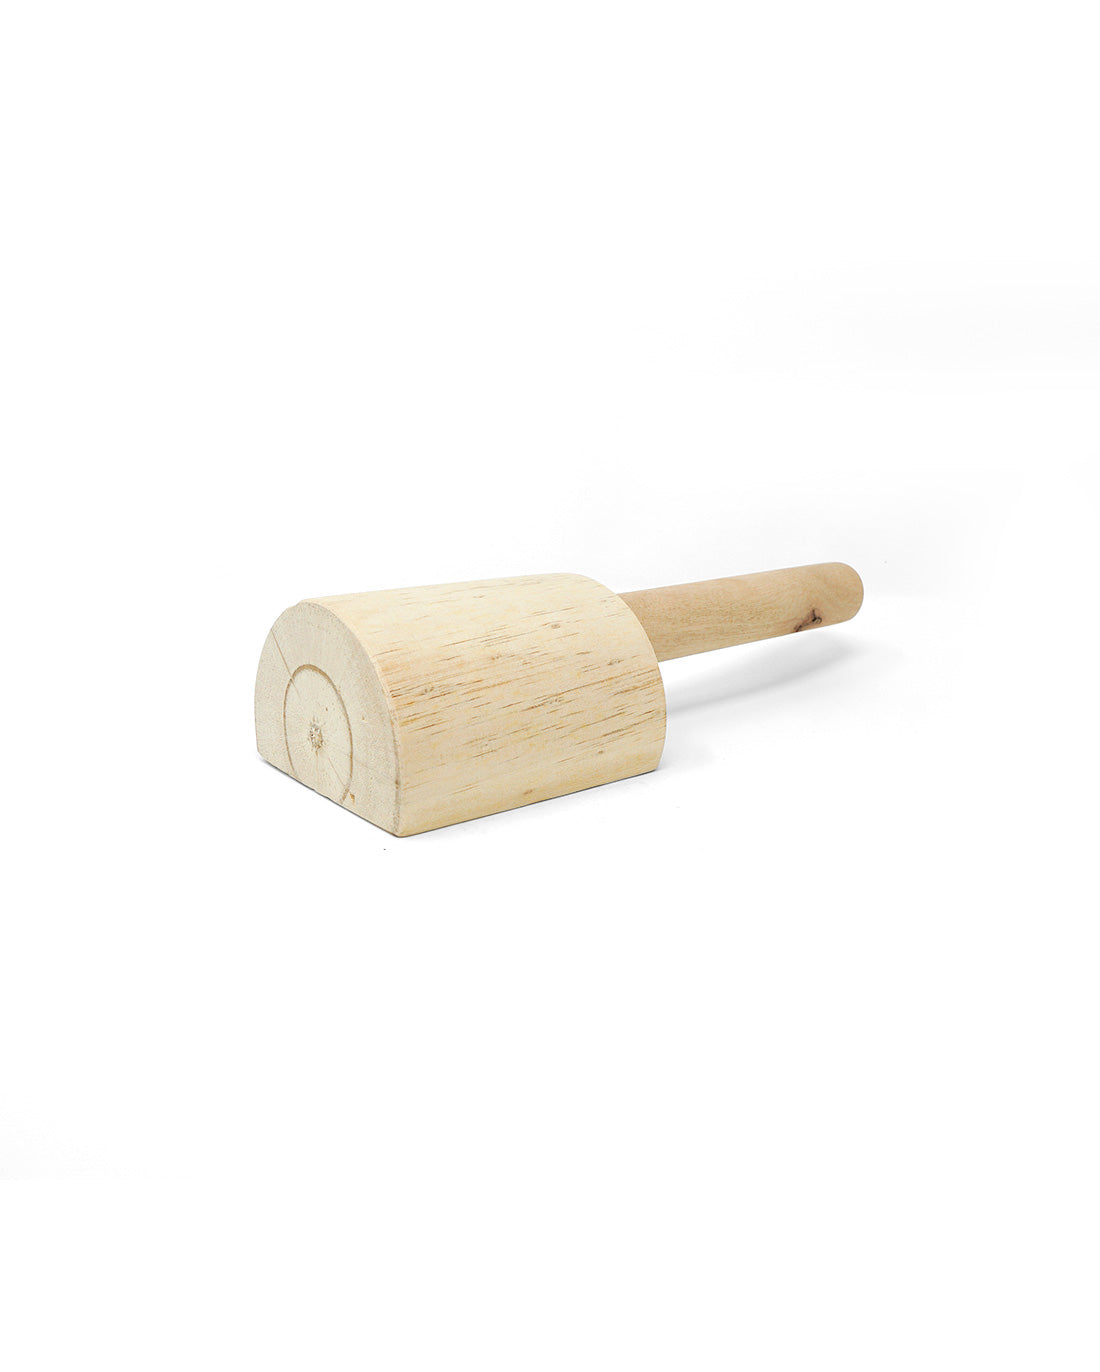 Clay Mallet 